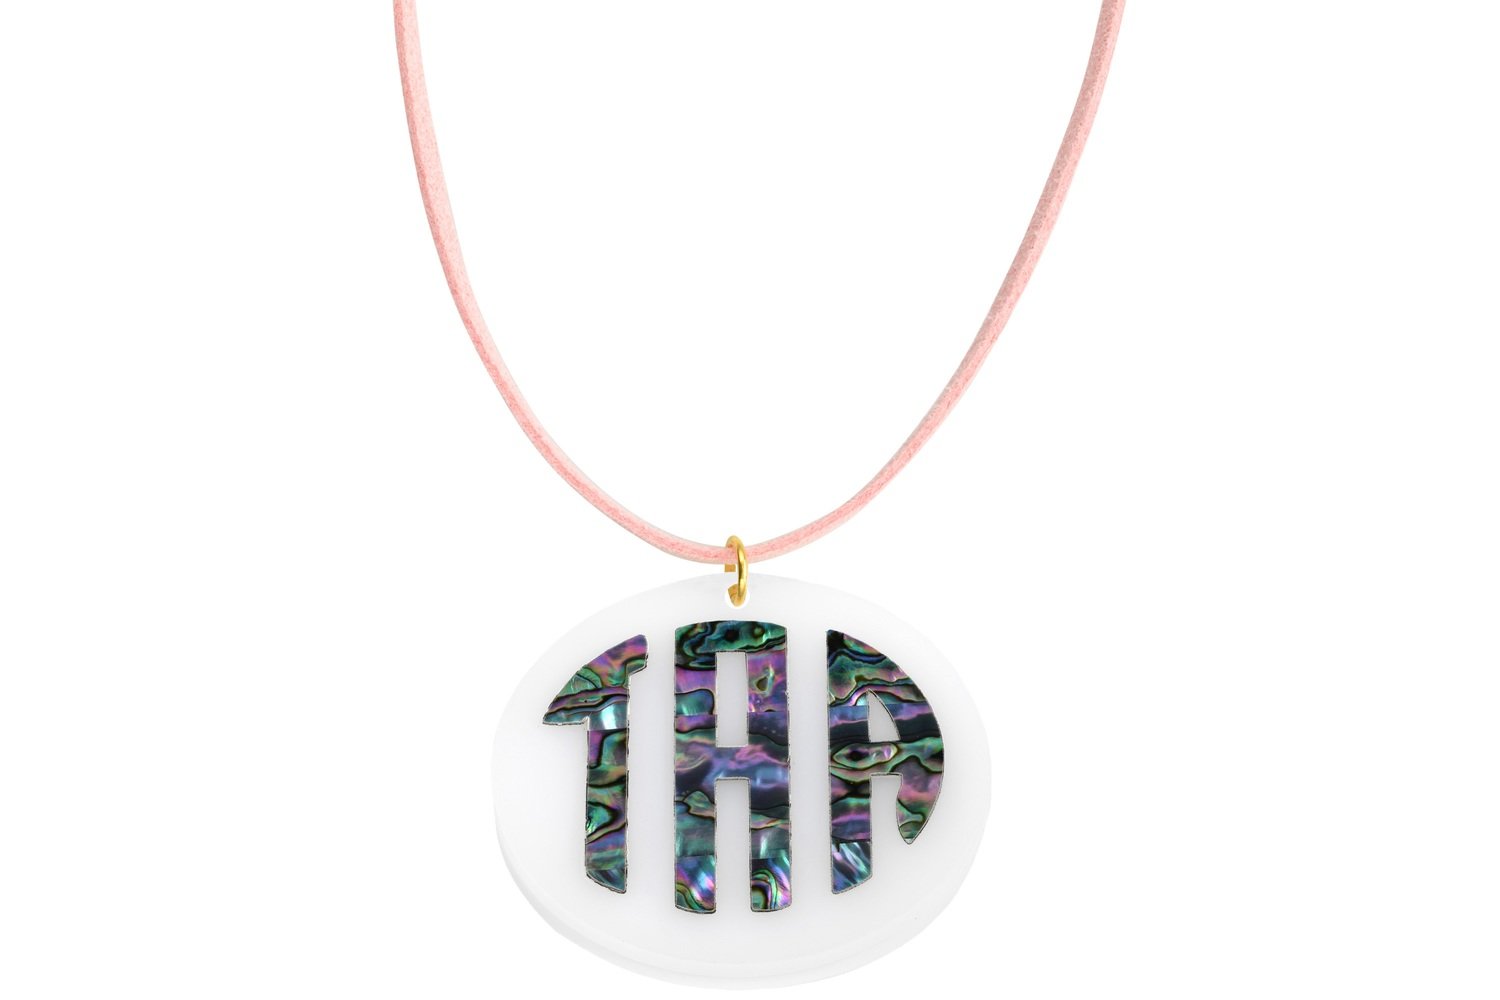 Mother of Pearl Monogram Pendant with Suede Leather Cord Necklace